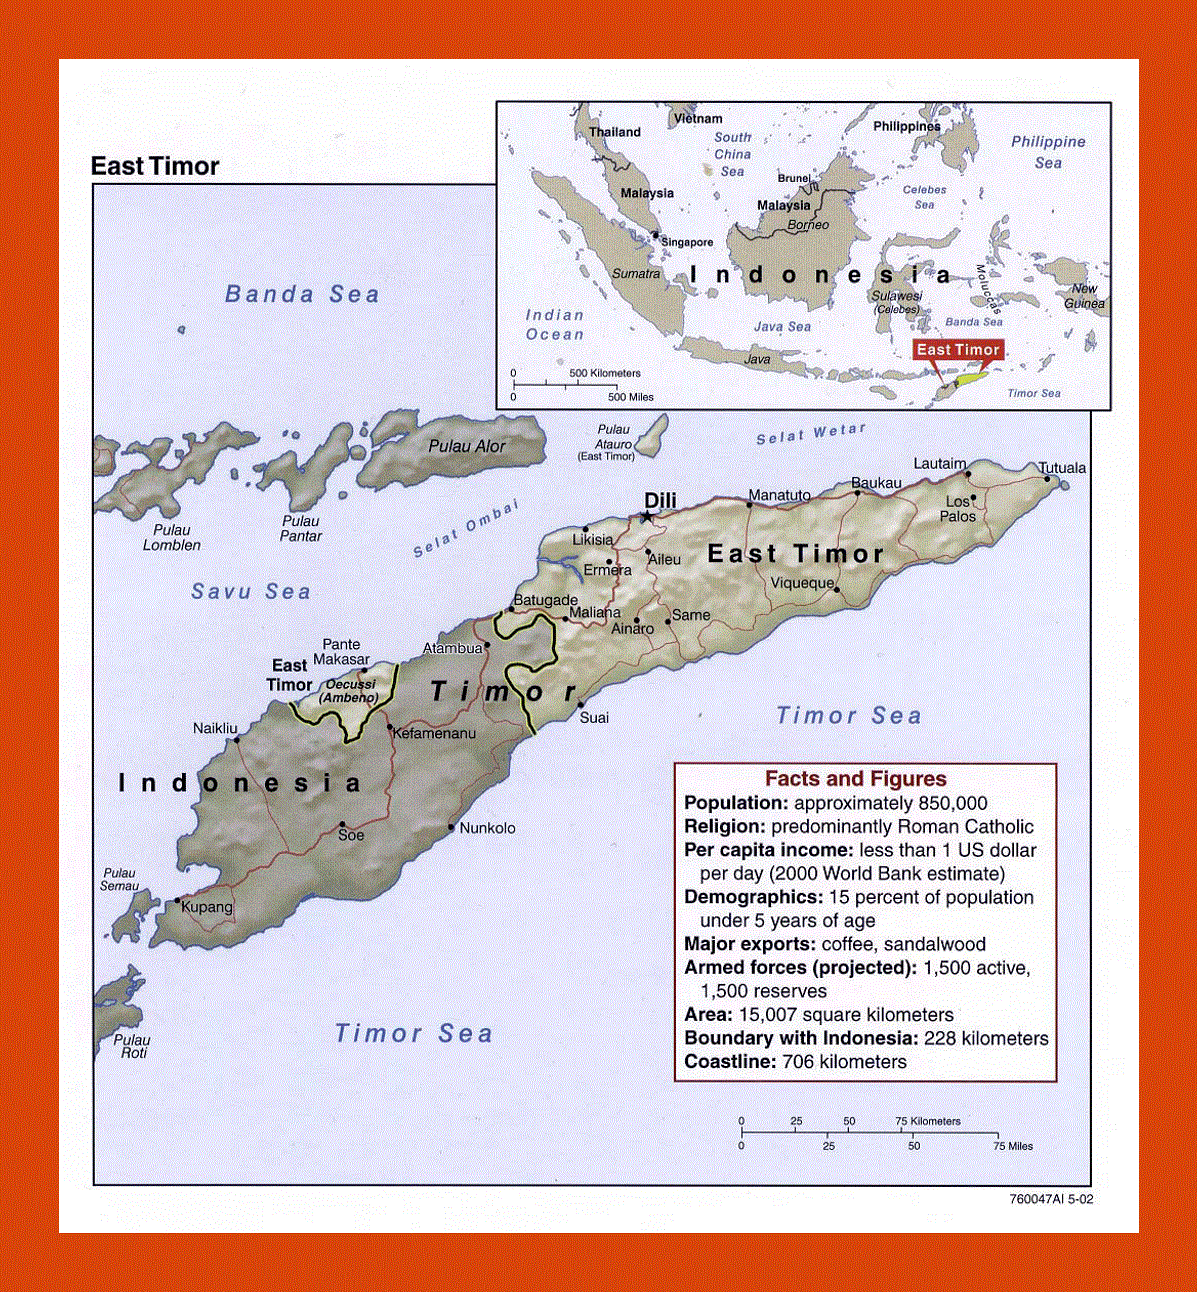 Political map of East Timor - 2002